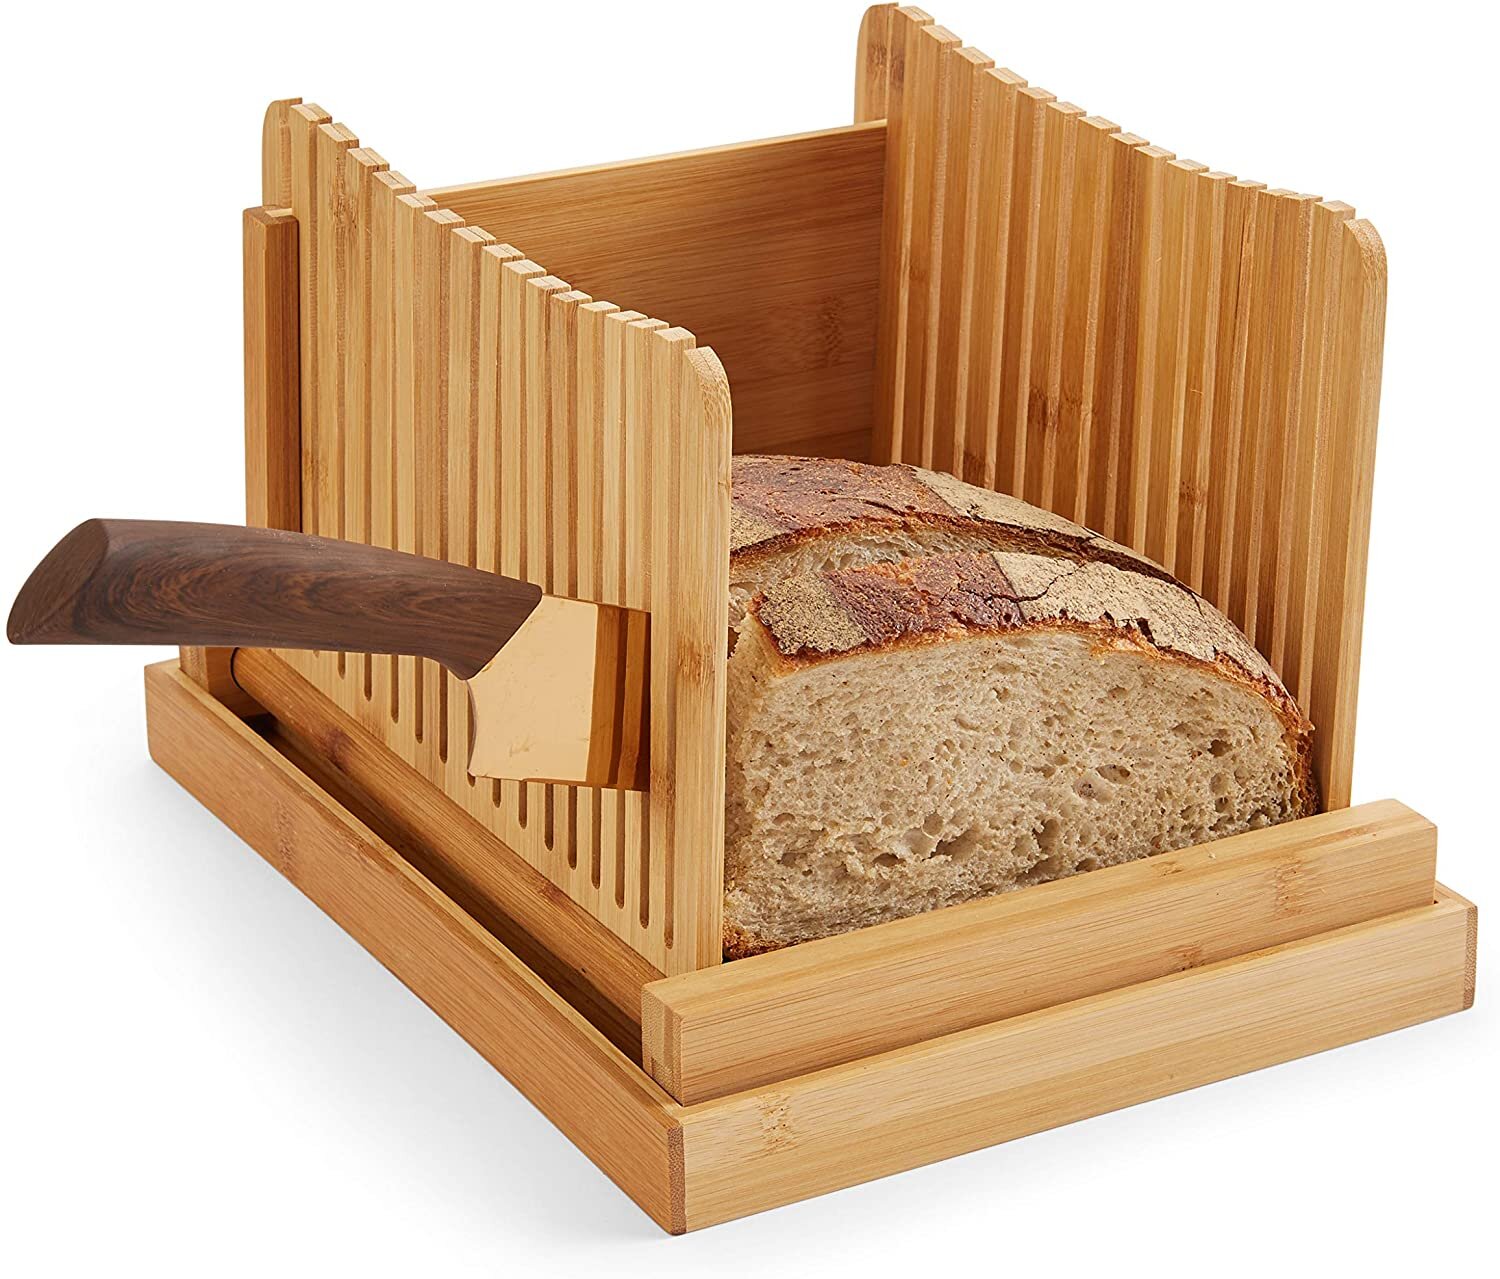 Professional Bamboo Bread Slicer - Homemade Compact Durable